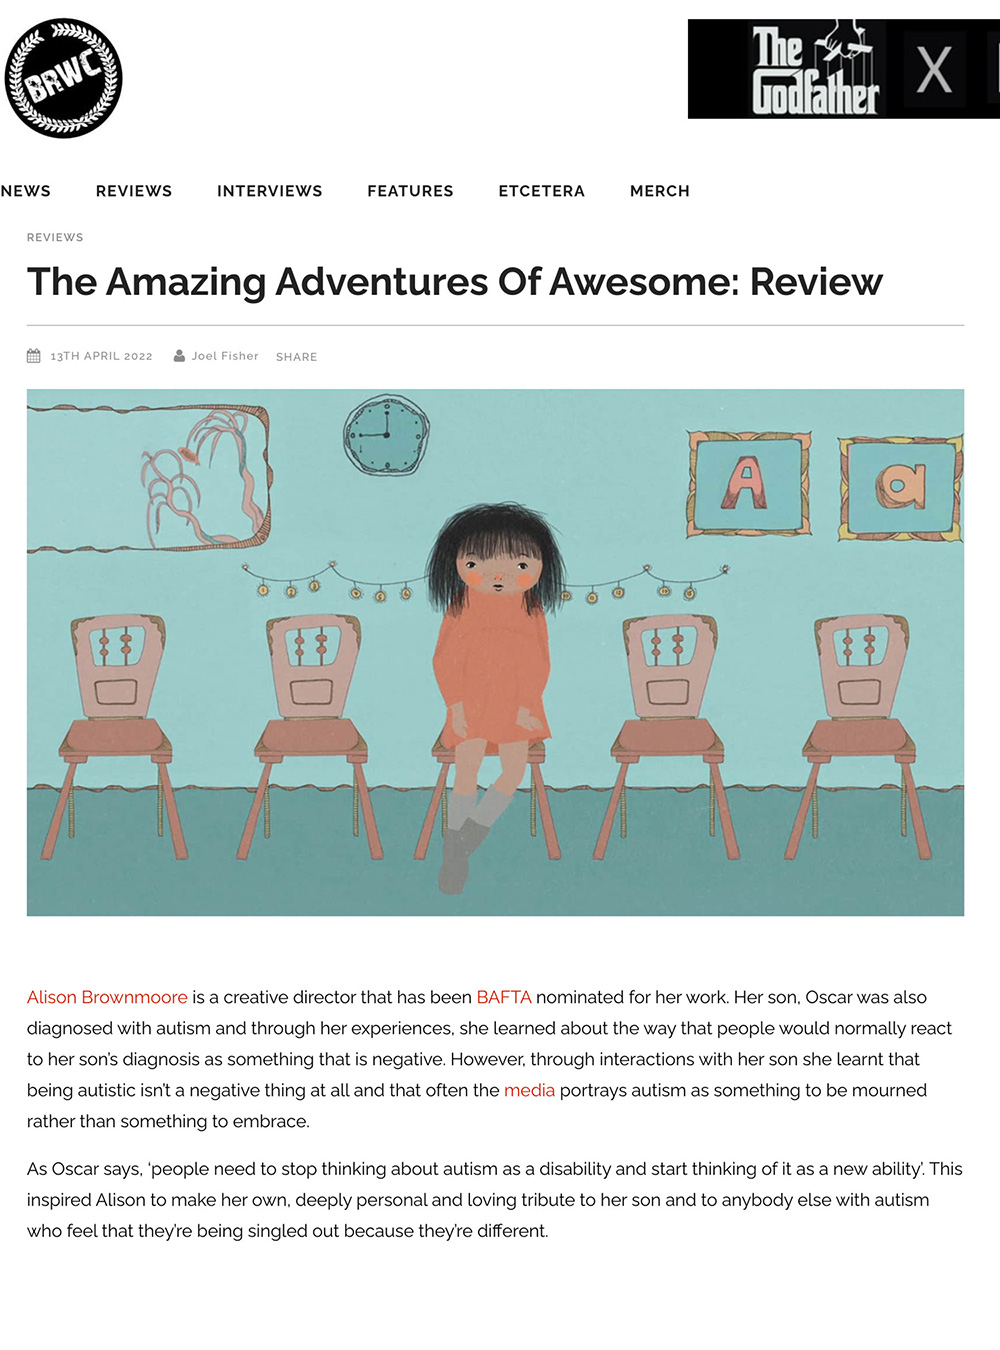 Allison Brownmoore The Amazing Adventures of Awesome BRWC article thumbnail